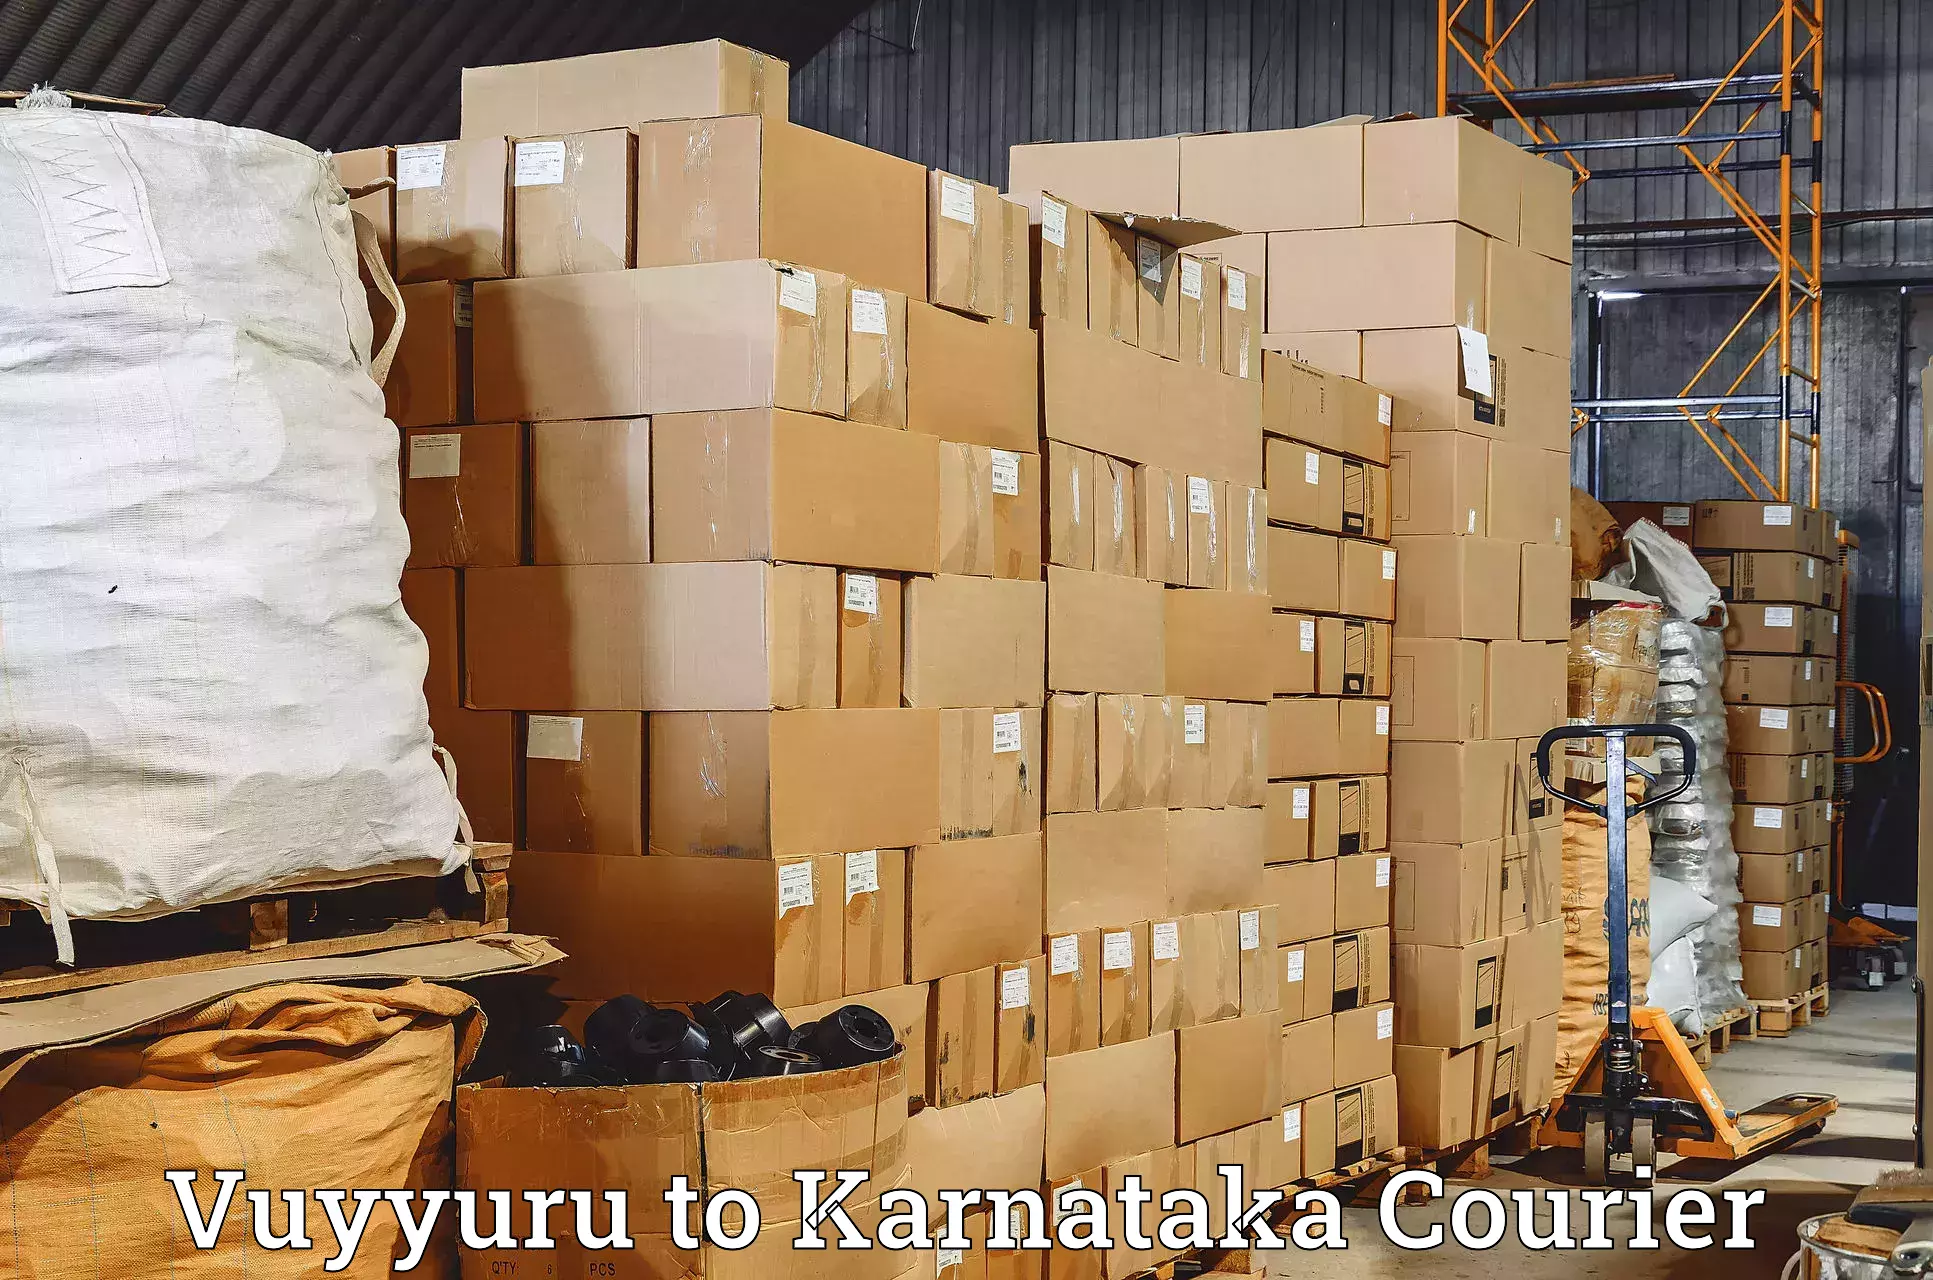 Round-the-clock parcel delivery Vuyyuru to Yellare